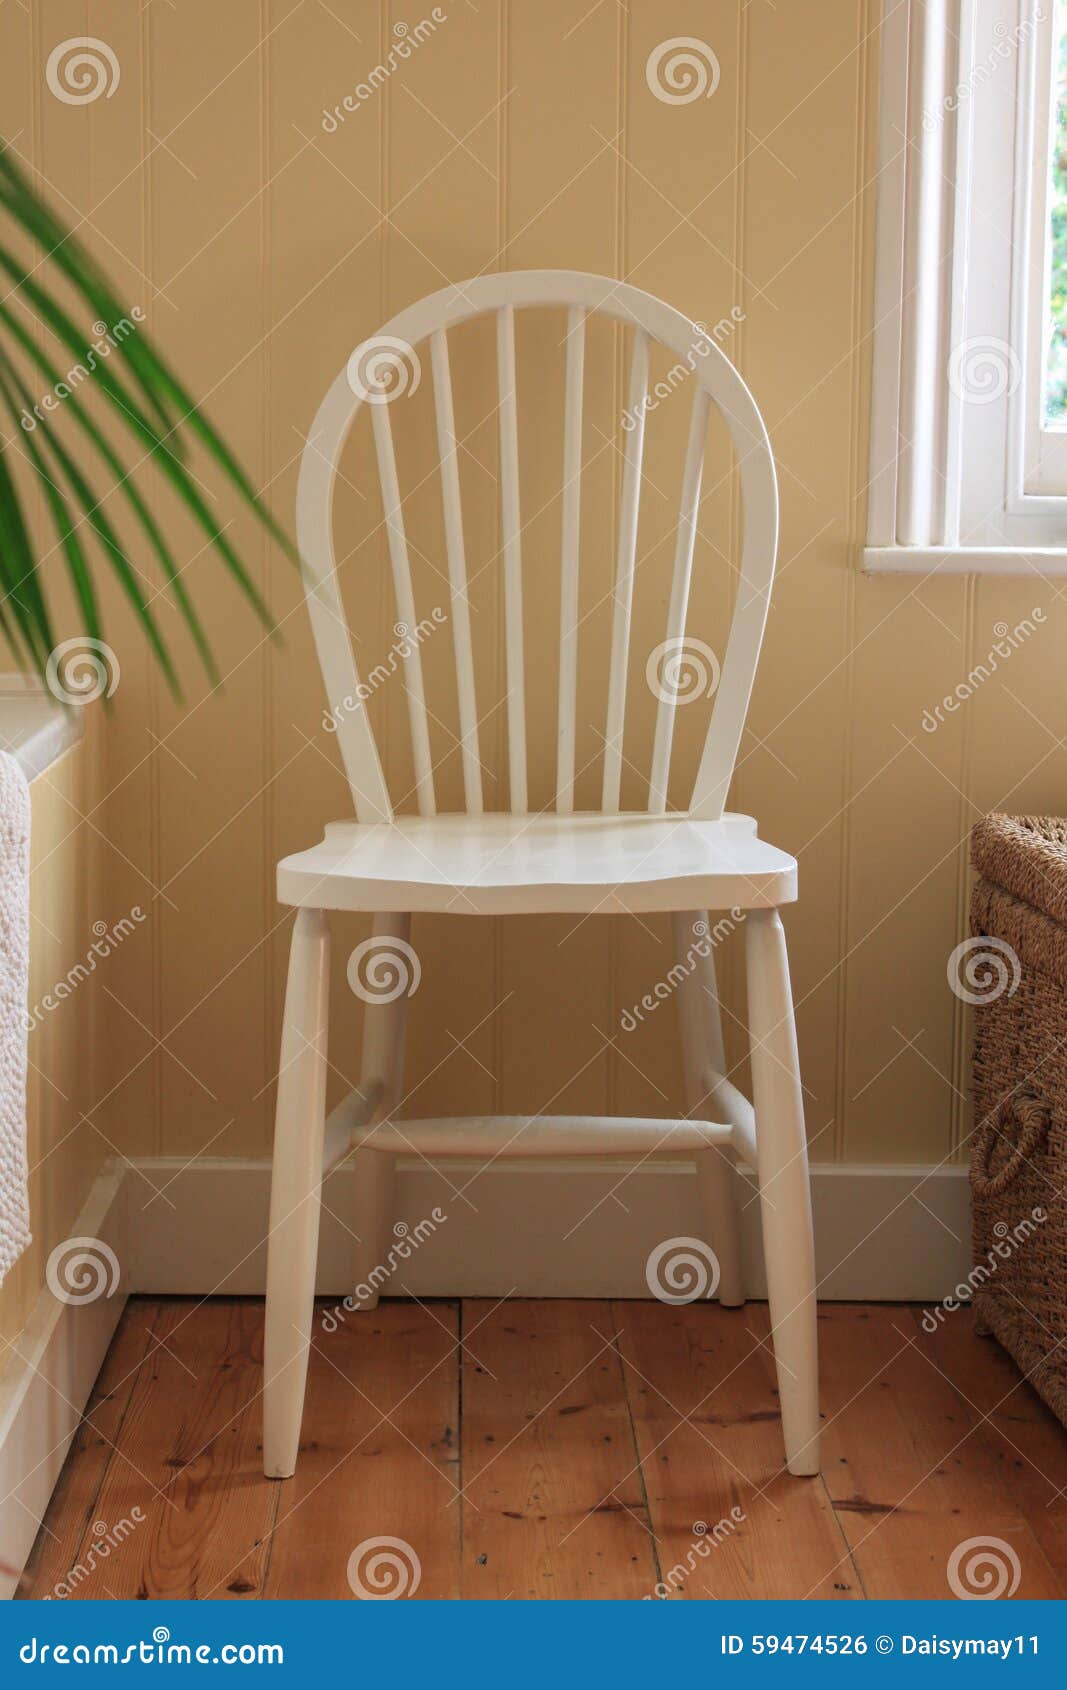 White Wooden Bathroom Chair Stock Photo - Image of power ...